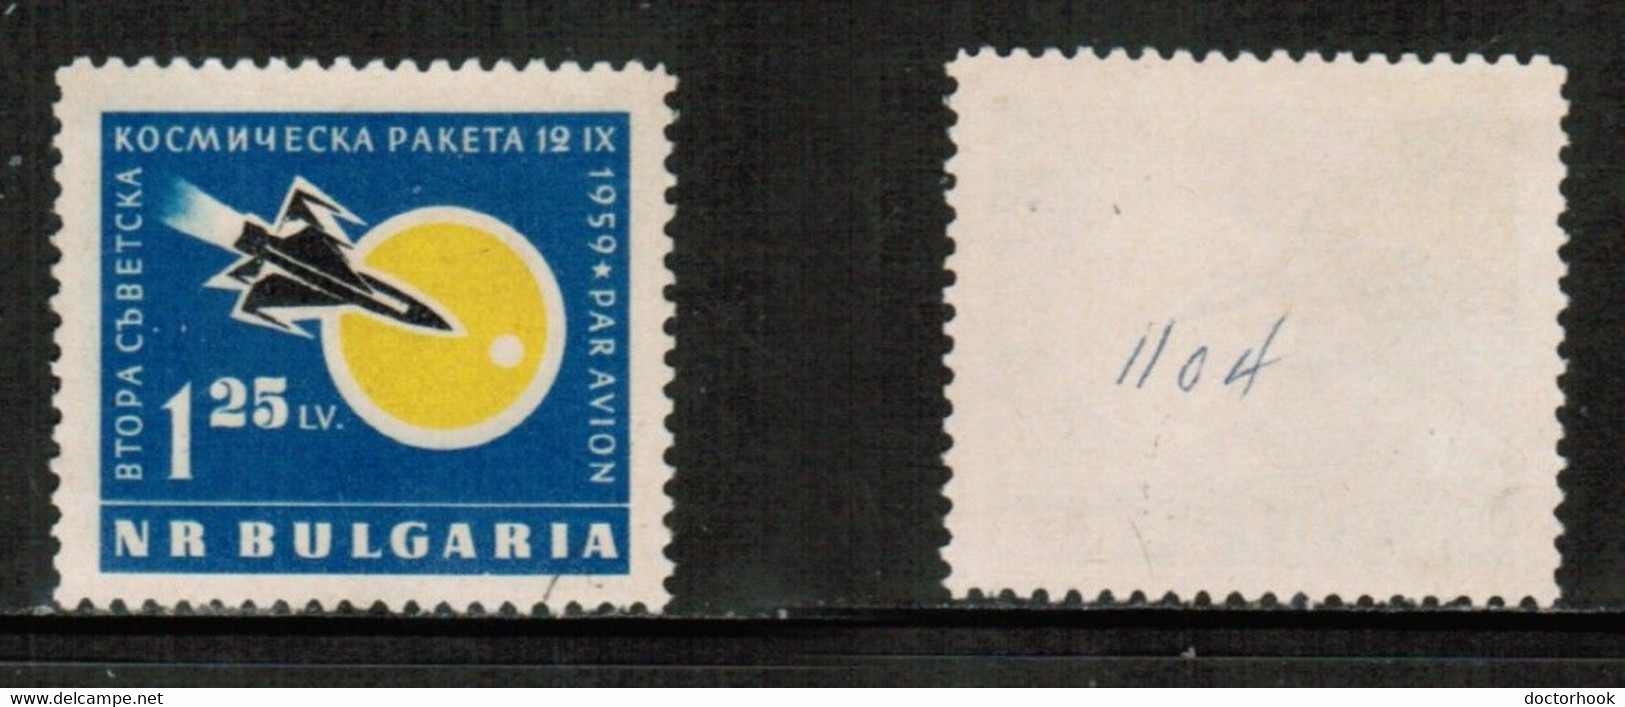 BULGARIA   Scott # C 79 USED (CONDITION AS PER SCAN) (Stamp Scan # 878-6) - Luftpost